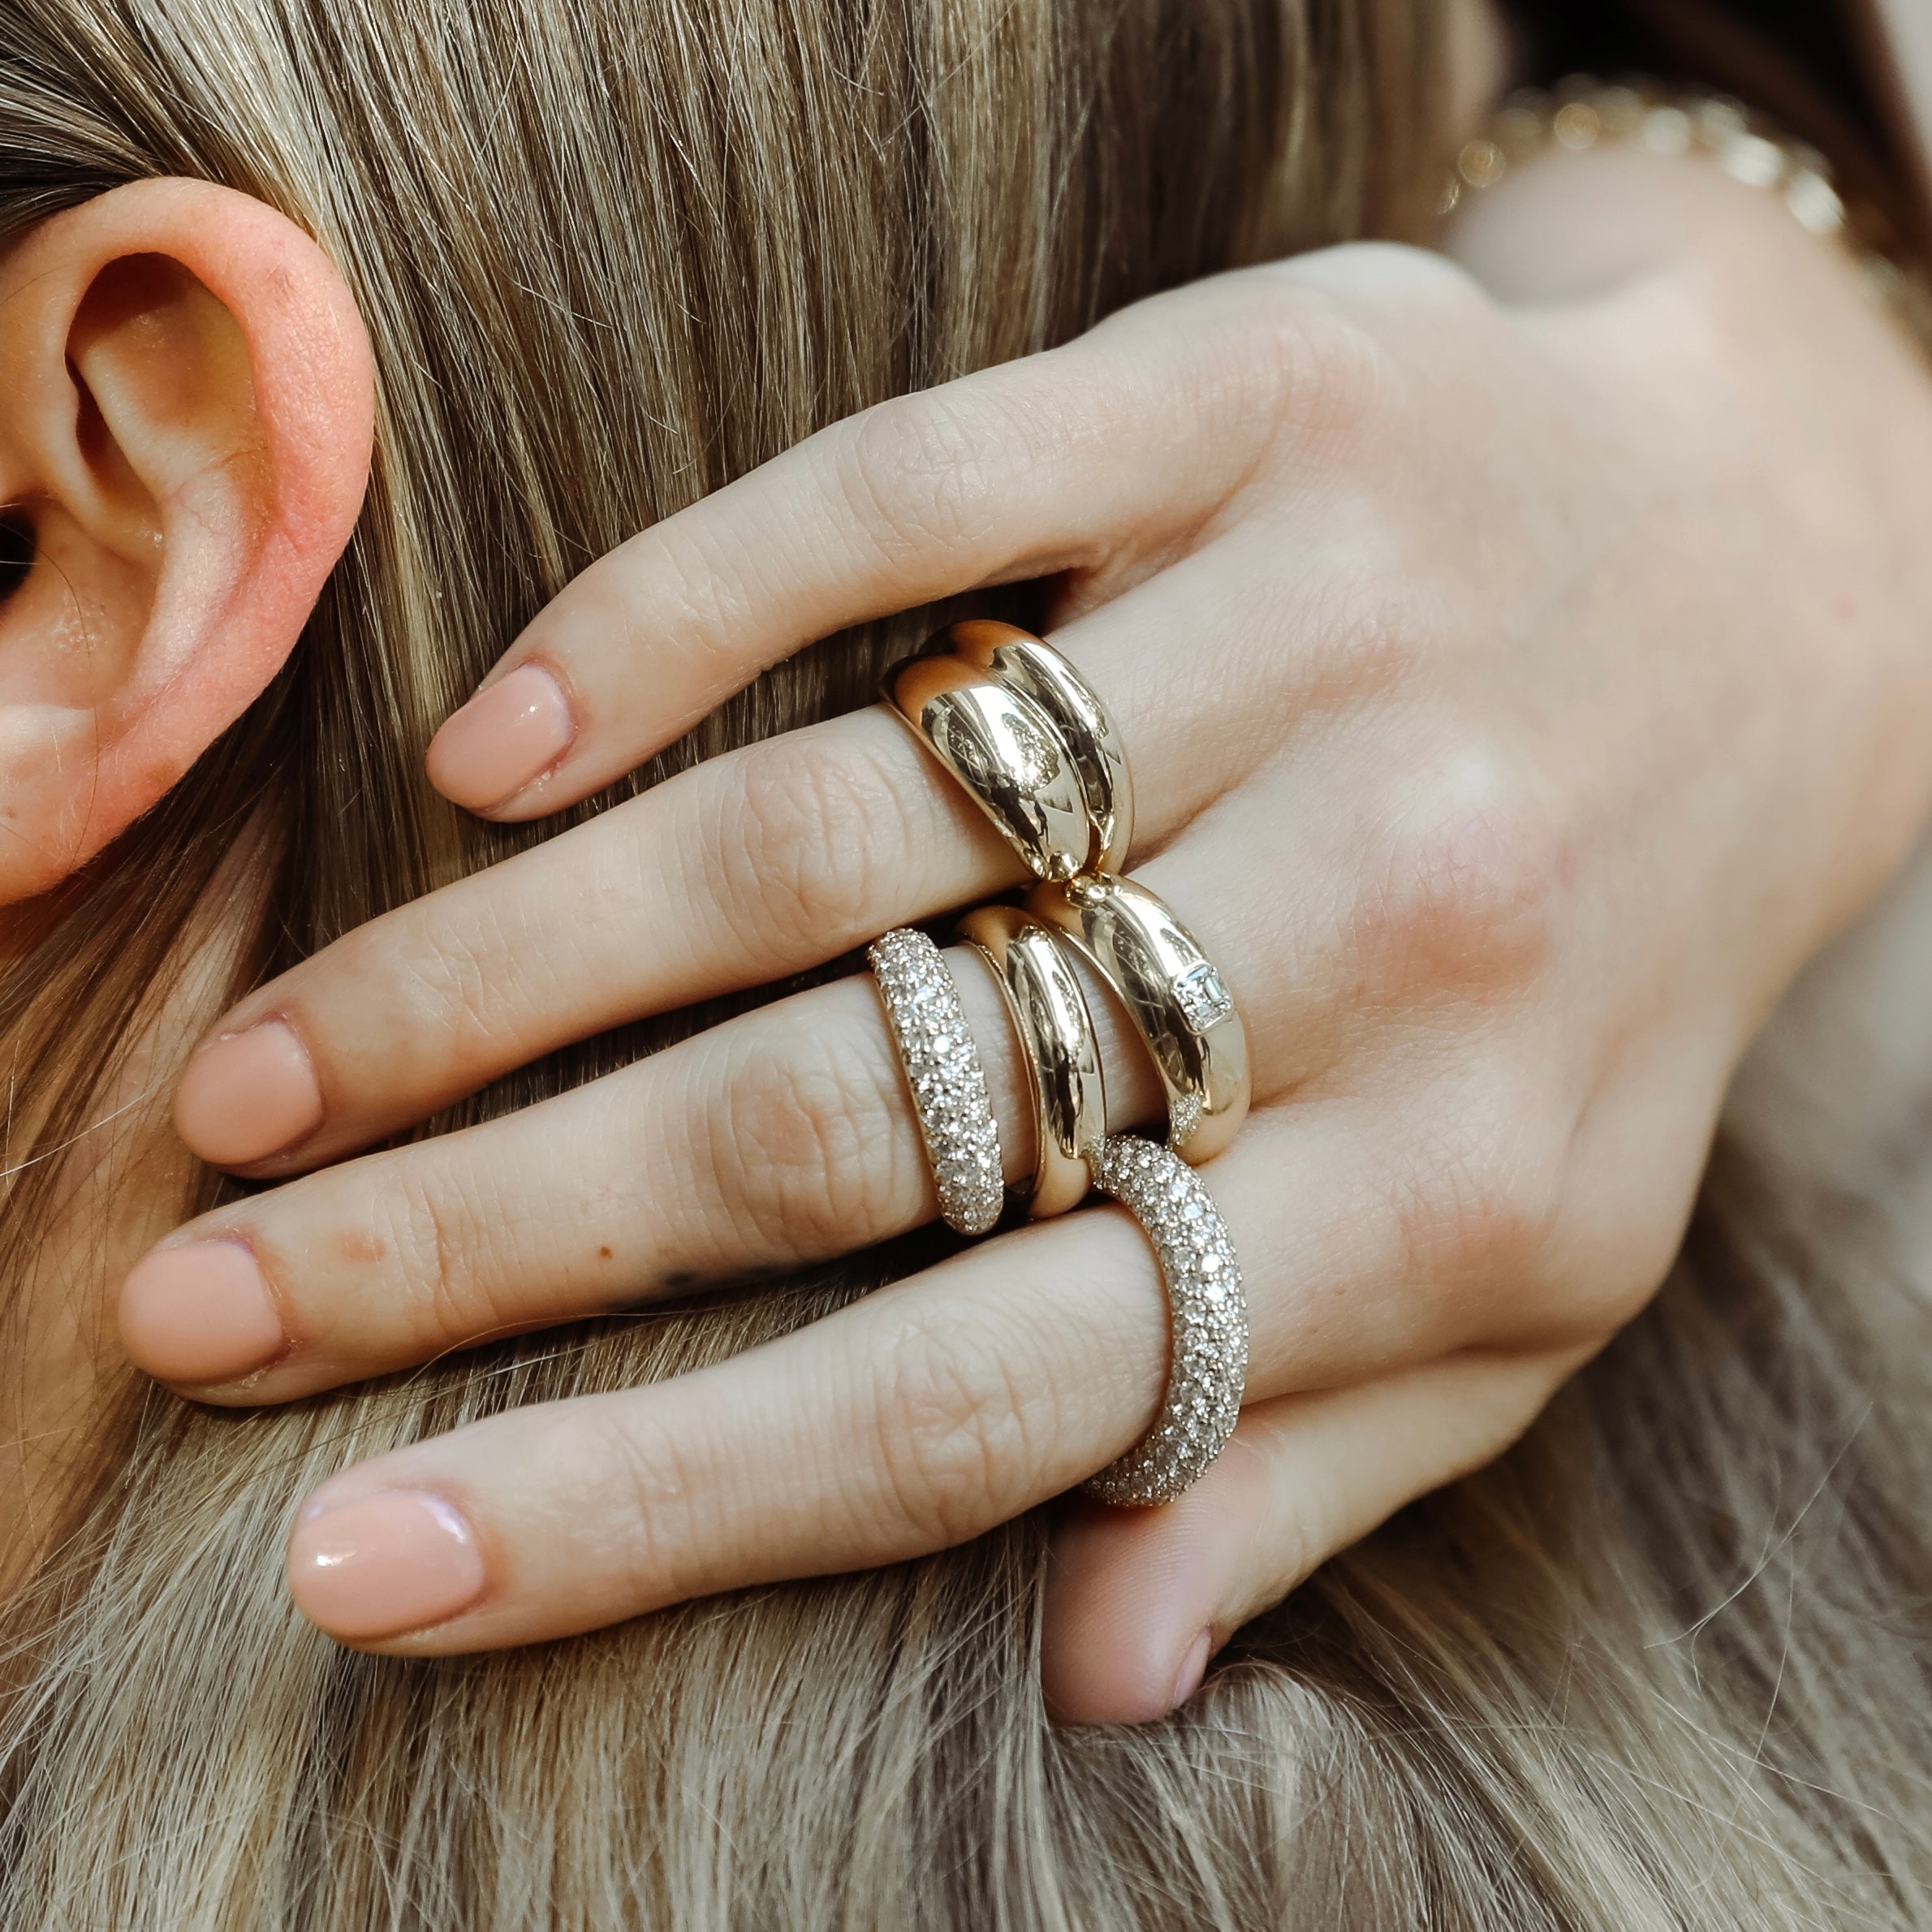 Dome Wrap Ring shown on the ring finger